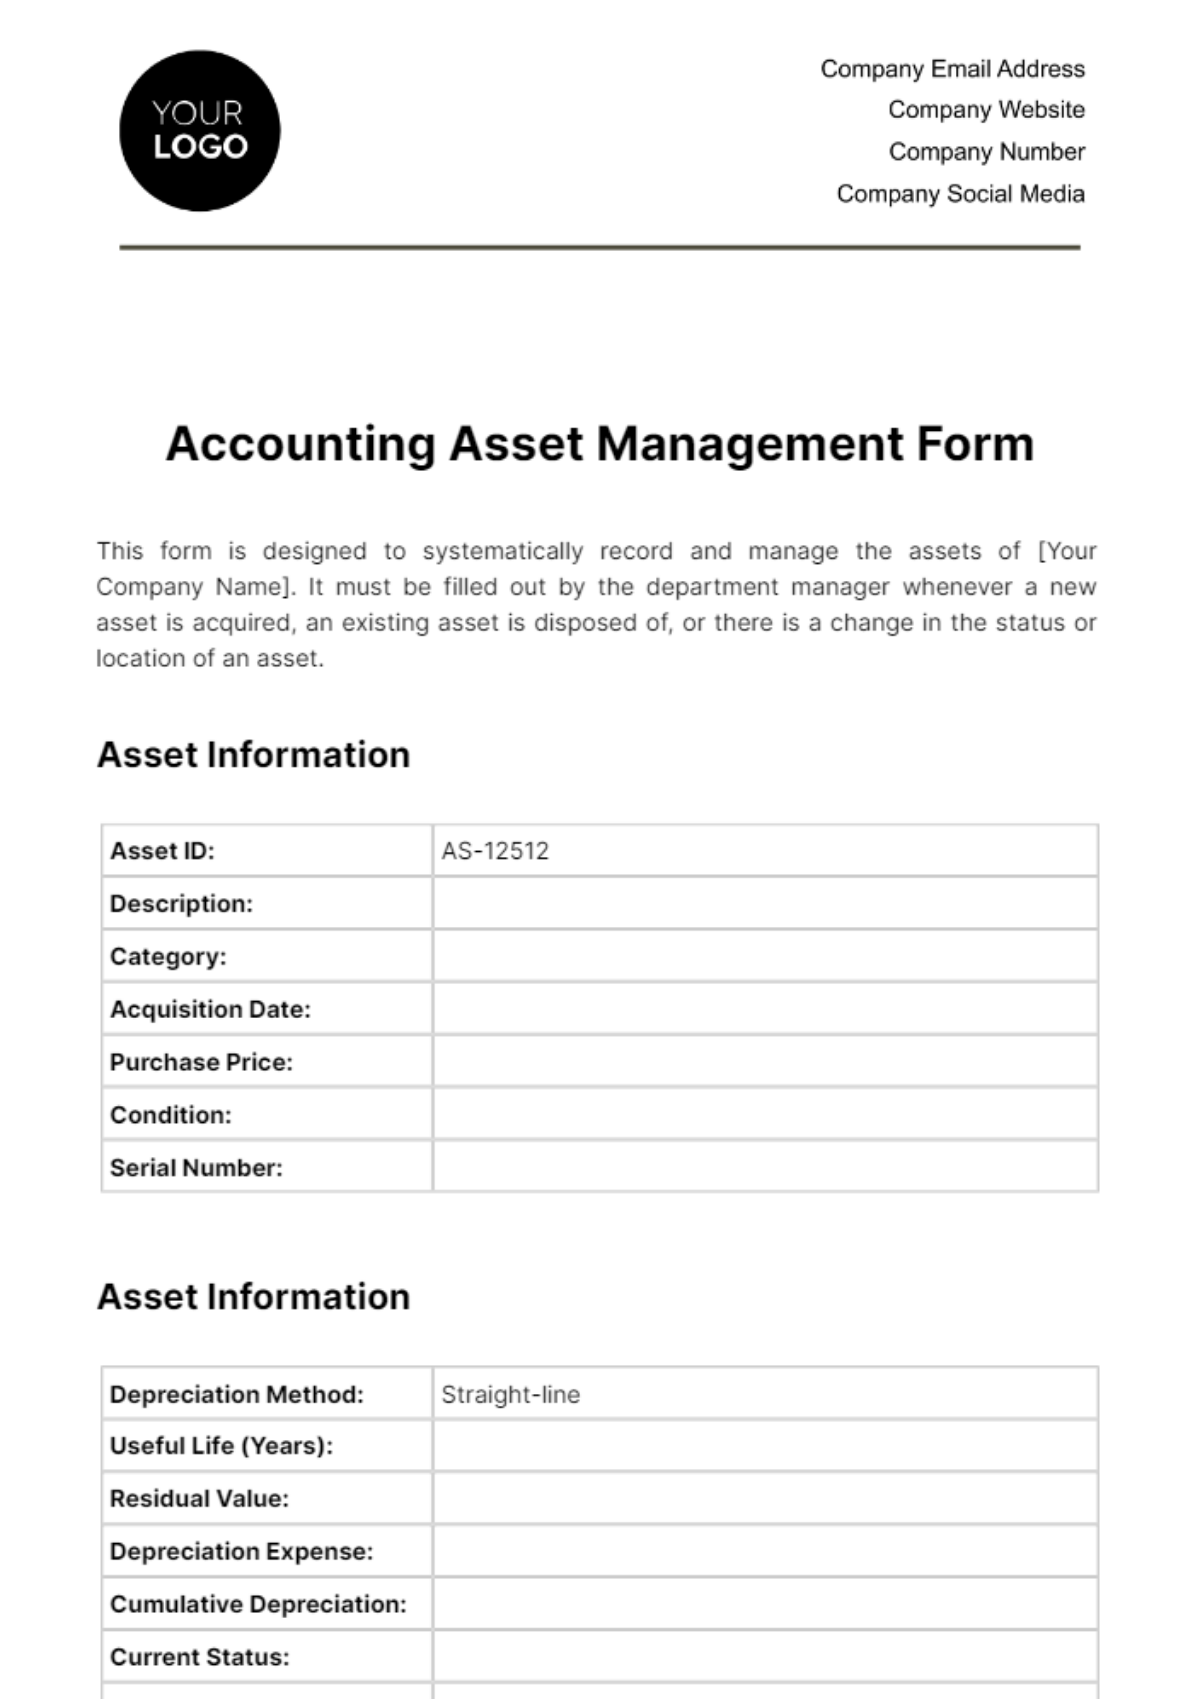 Free Accounting Asset Management Form Template